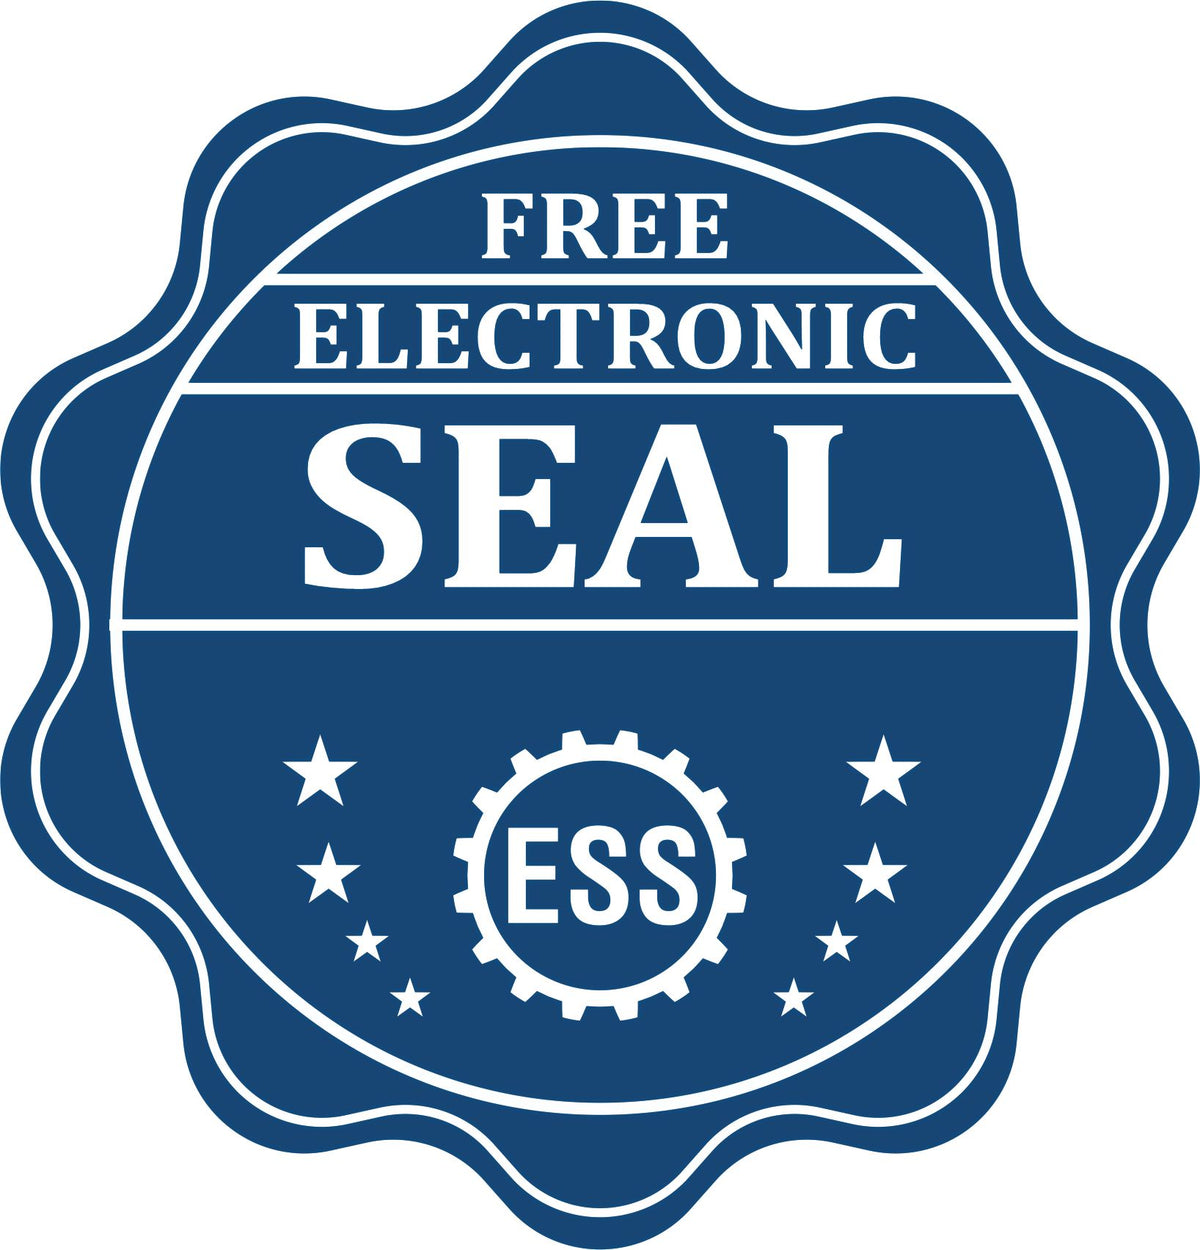 A badge showing a free electronic seal for the State of Alaska Soft Land Surveyor Embossing Seal with stars and the ESS gear on the emblem.